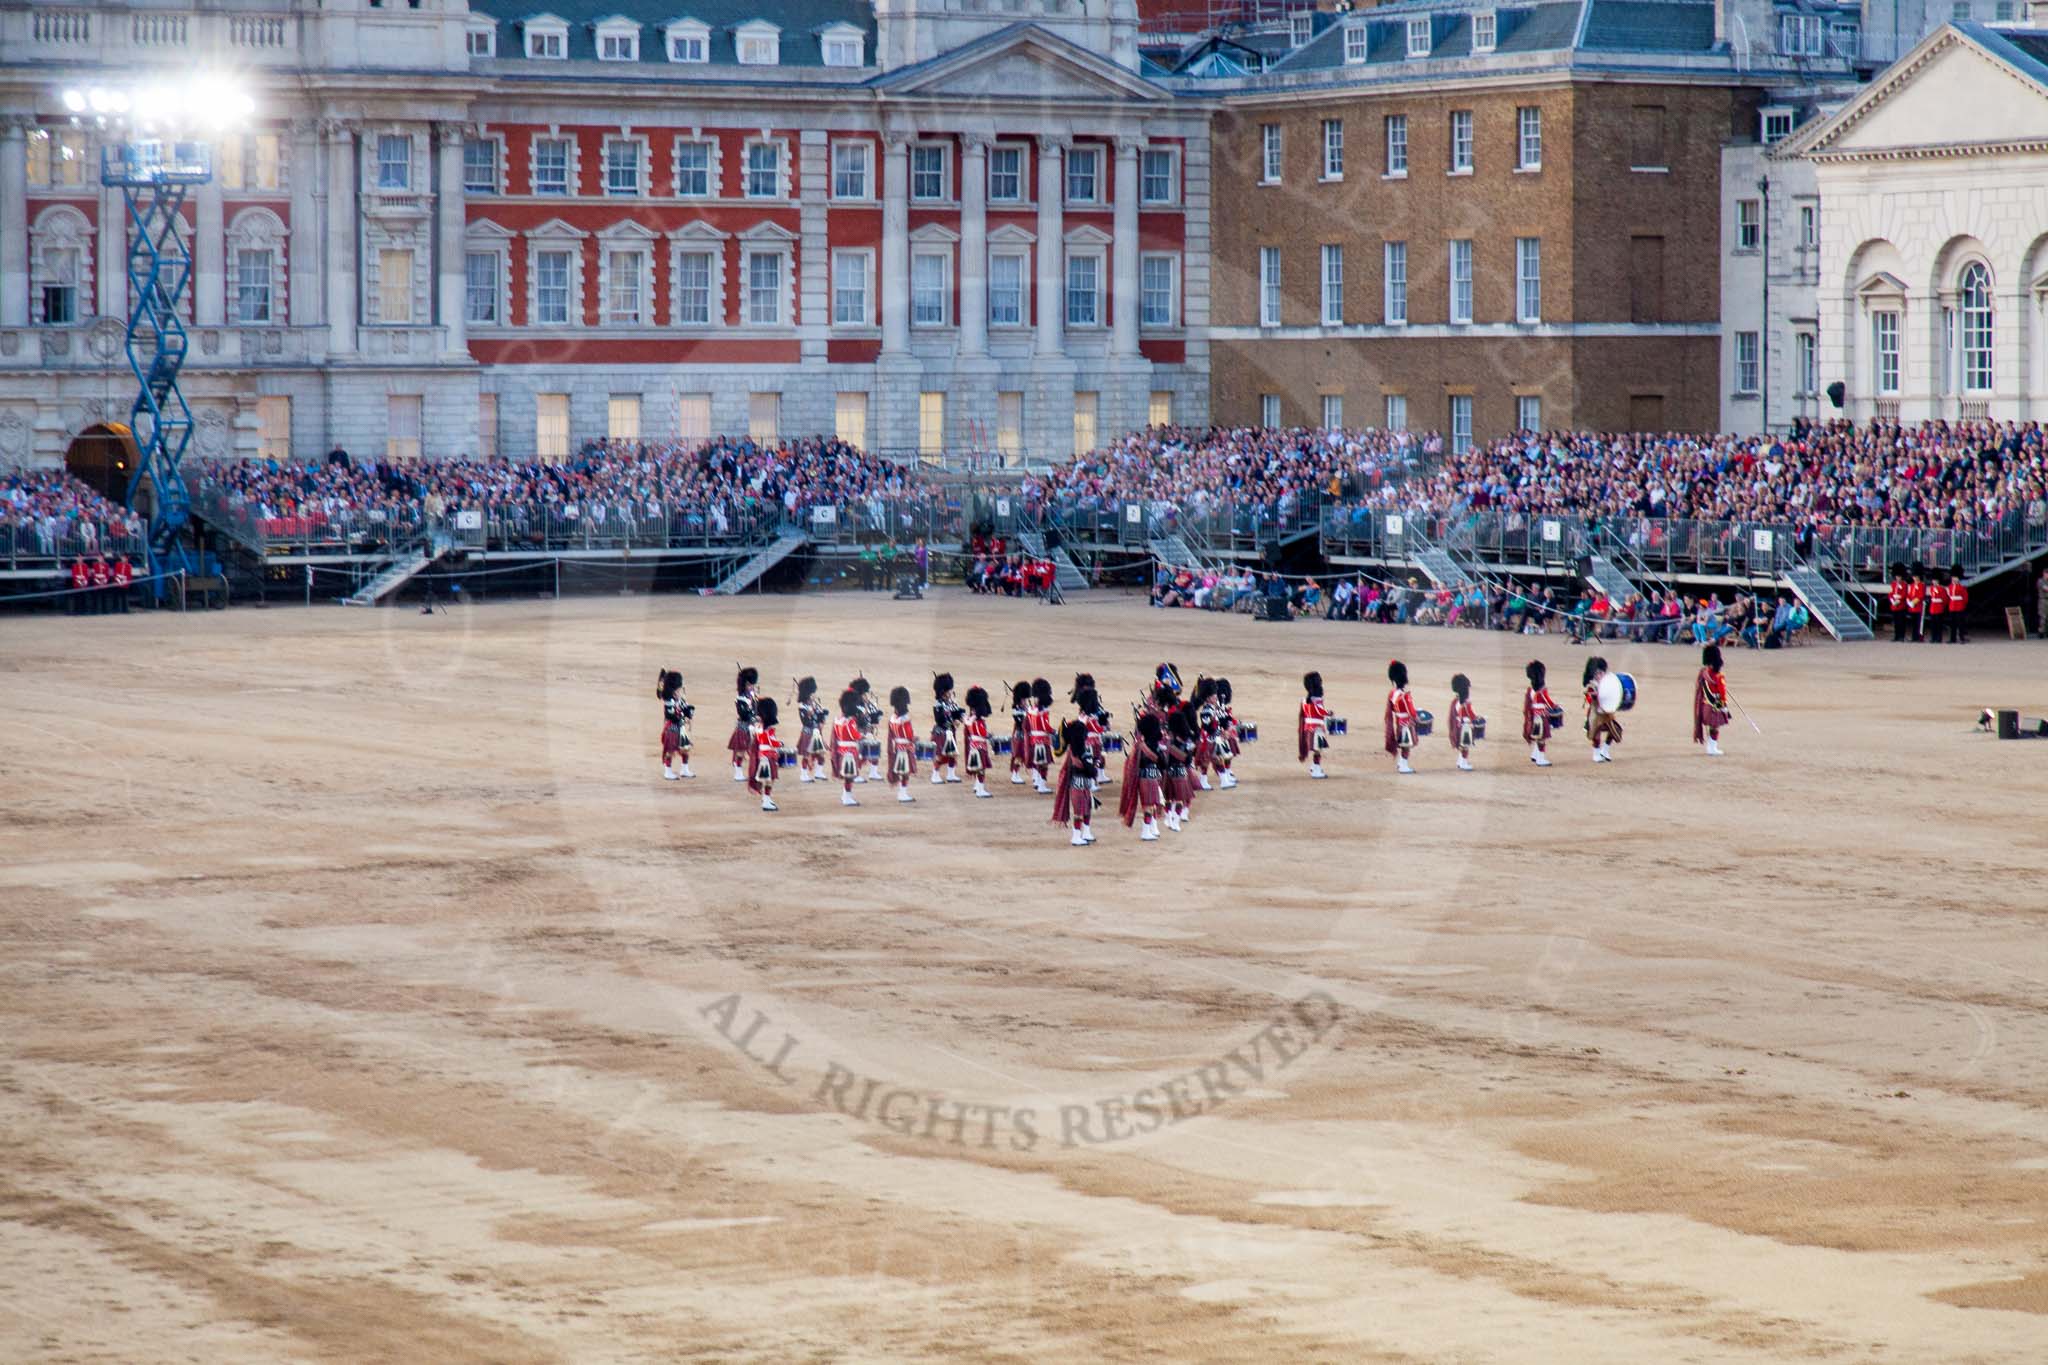 Beating Retreat 2014.
Horse Guards Parade, Westminster,
London SW1A,

United Kingdom,
on 11 June 2014 at 21:14, image #292